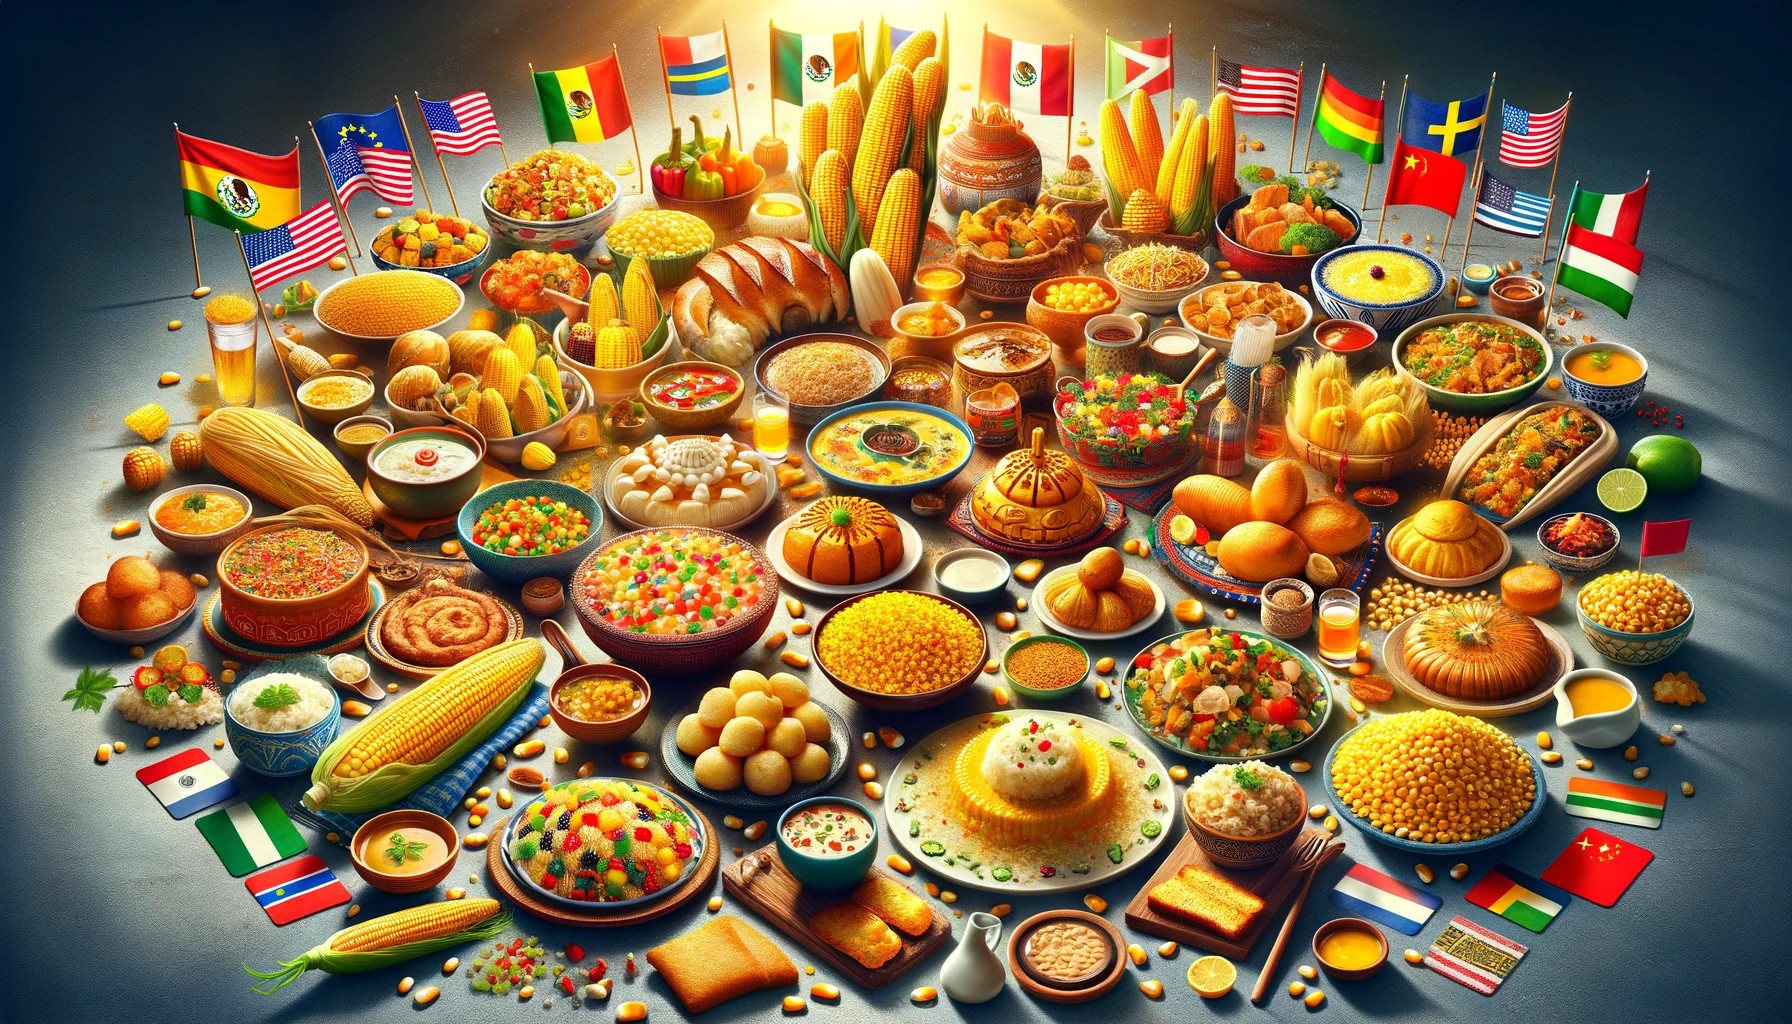 A festive image showing corn being celebrated in various cultural dishes around the world, emphasizing its global appeal.